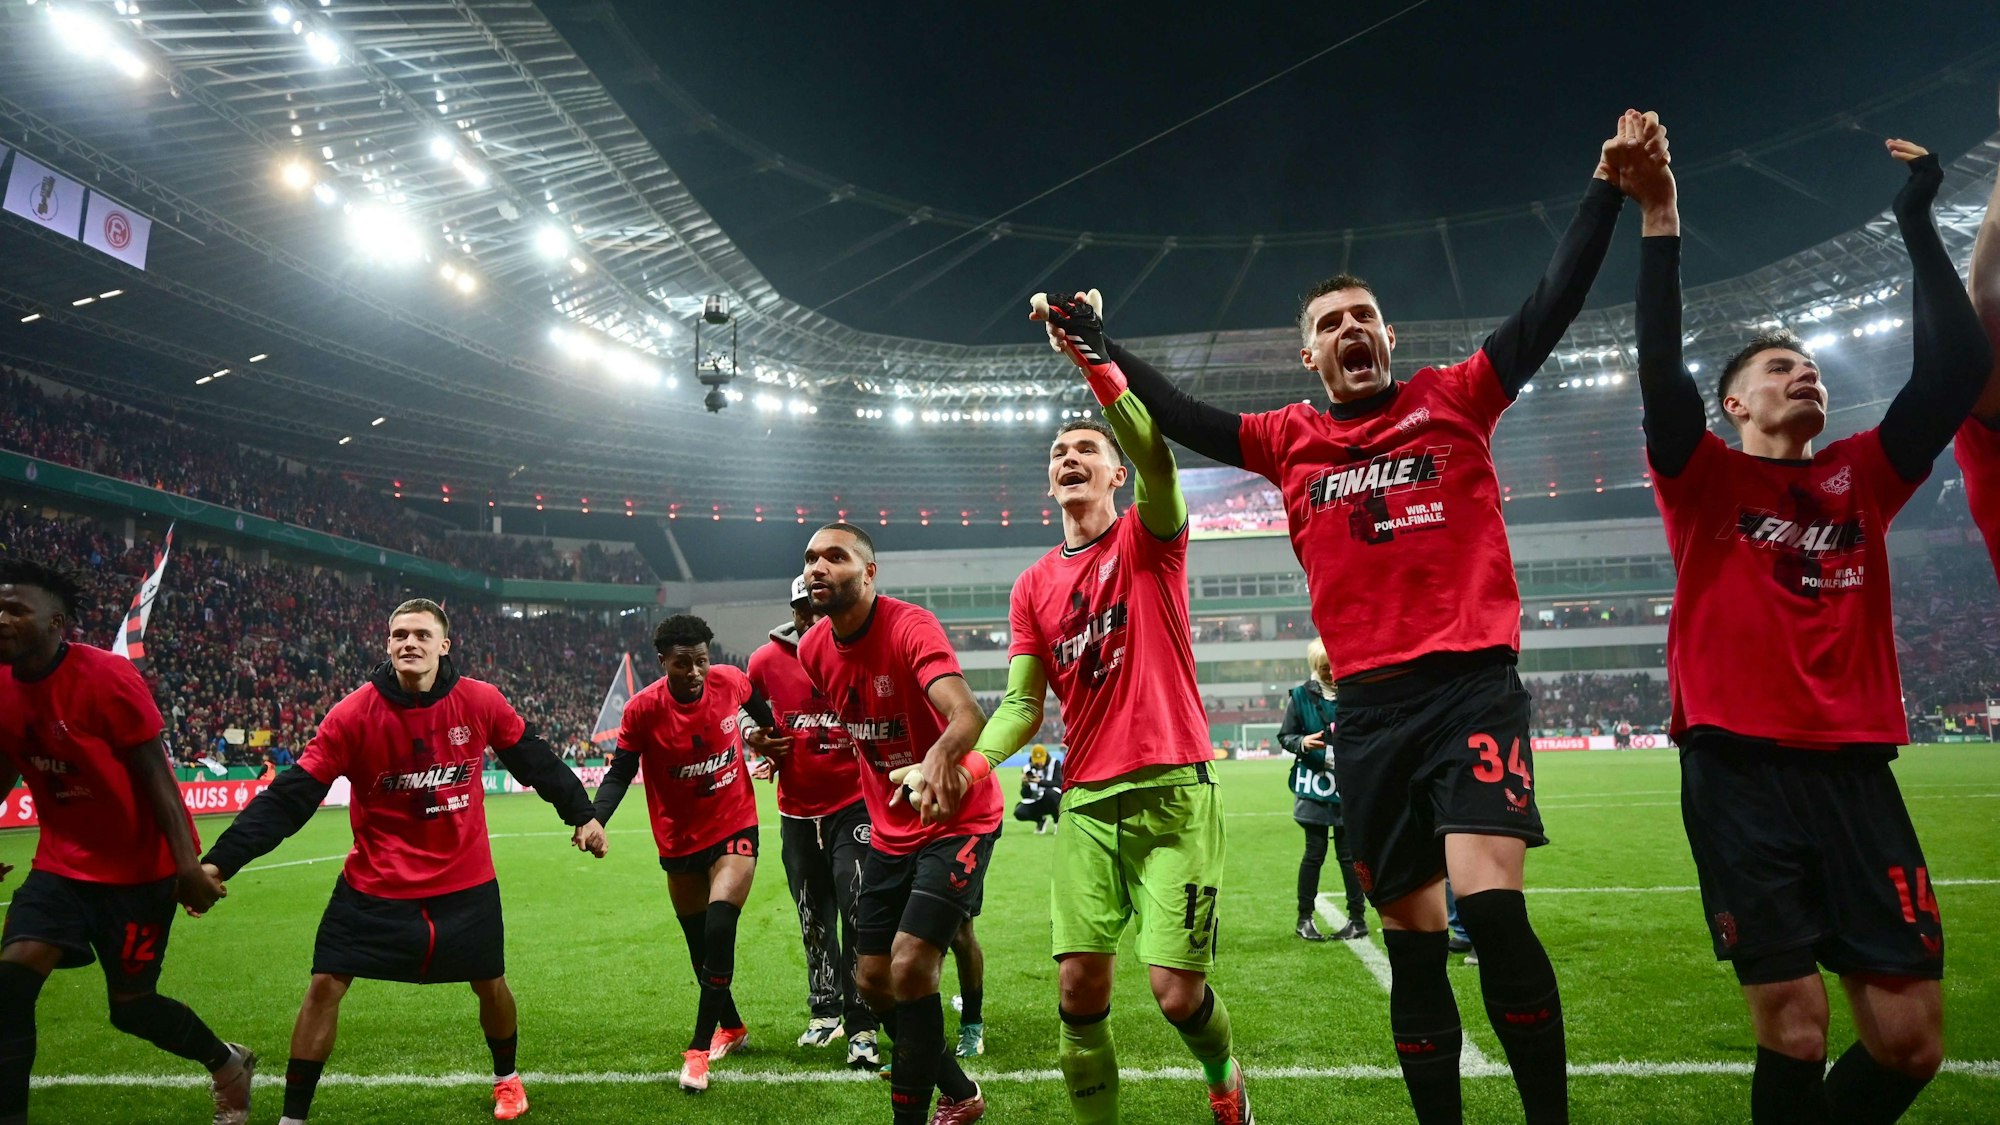 (LtoR) Bayer Leverkusen's Burkinabe defender #12 Edmond Tapsoba, Bayer Leverkusen's German midfielder #10 Florian Wirtz, Bayer Leverkusen's Nigerian midfielder #19 Nathan Tella, Bayer Leverkusen's German defender #04 Jonathan Tah, Leverkusen's Czech goalkeeper #17 Matej Kovar, Bayer Leverkusen's Swiss midfielder #34 Granit Xhaka and Bayer Leverkusen's Czech forward #14 Patrik Schick celebrate their team's 4-0 win after the German Cup (DFB-Pokal) semi-final football match between Bayer 04 Leverkusen and Fortuna Duesseldorf in Leverkusen, western Germany on April 3, 2024. (Photo by INA FASSBENDER / AFP) / DFB REGULATIONS PROHIBIT ANY USE OF PHOTOGRAPHS AS IMAGE SEQUENCES AND QUASI-VIDEO.